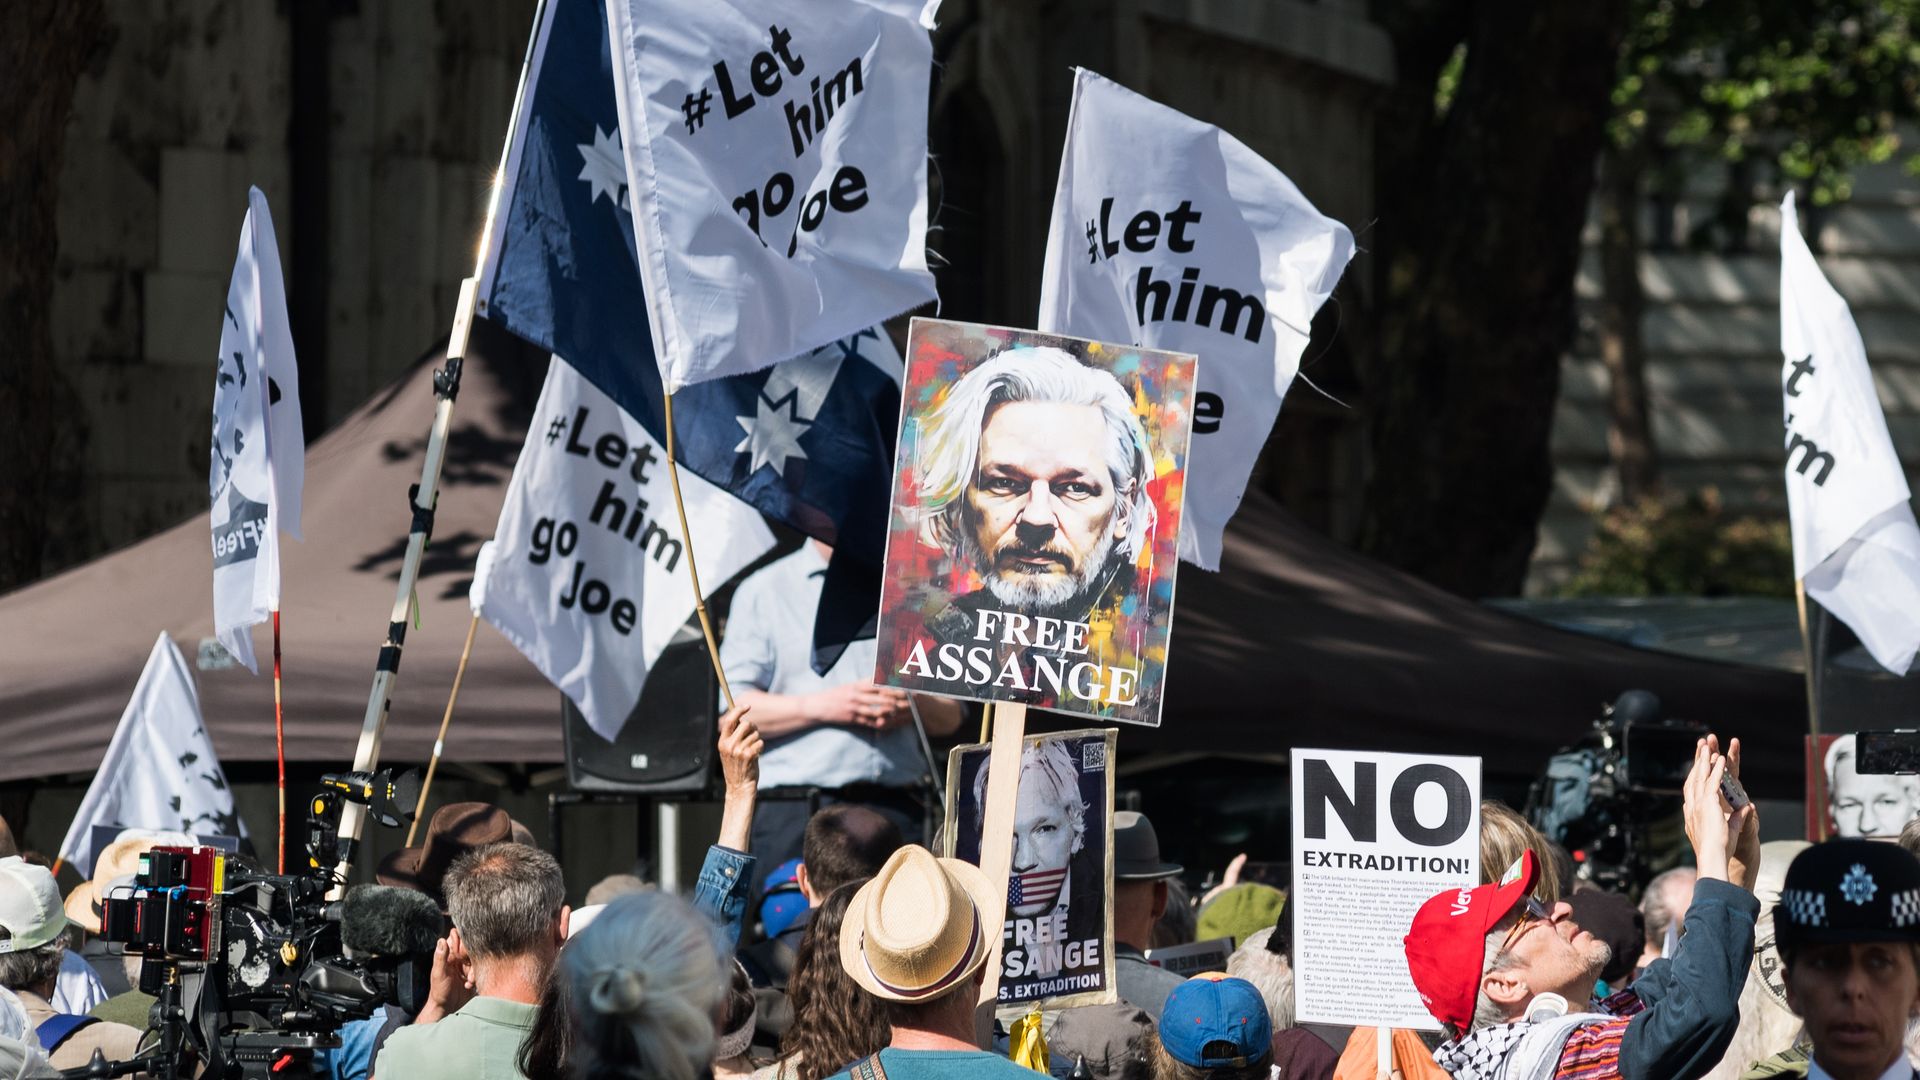 Supporters of Julian Assange demonstrate outside the Royal Courts of Justice as the High Court is set to deliver a ruling whether Assange can appeal against the US's extradition order in London, United Kingdom on May 20, 2024